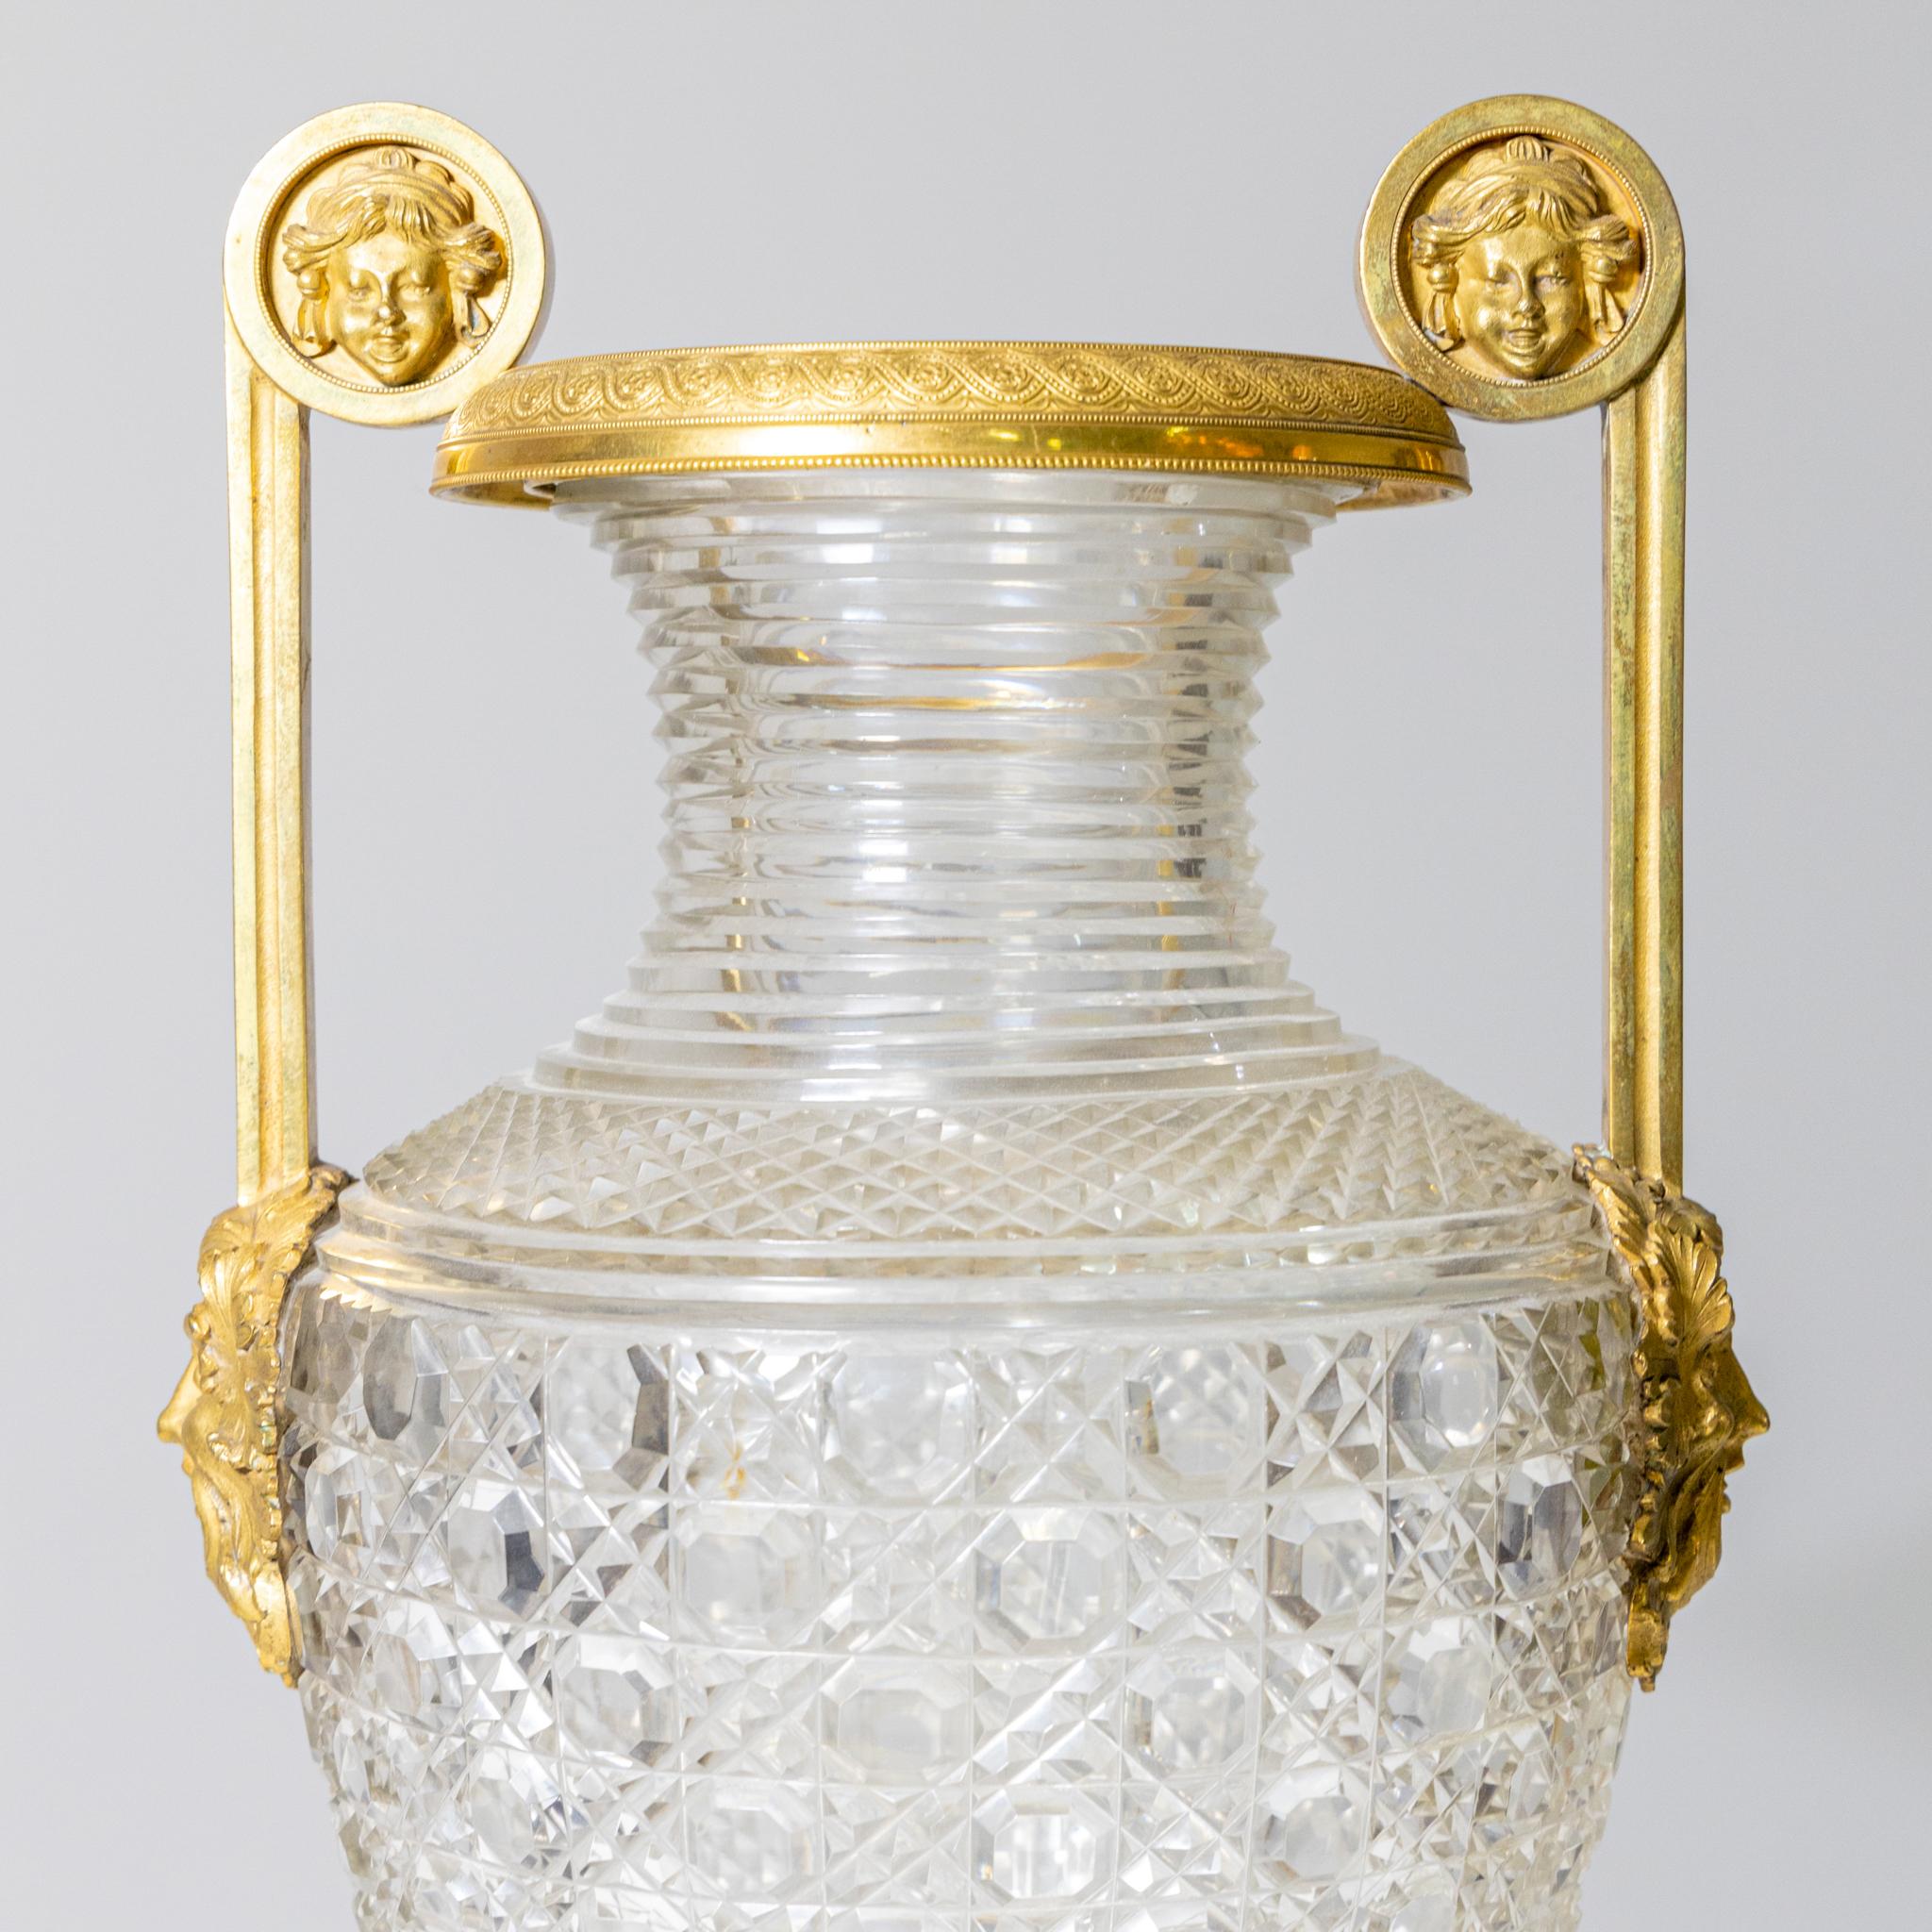 Large Russian cut crystal vase with mascarons on the sides and in the handles. Shown in Lit: St. Petersburg circa 1800: A Golden Age of the Russian Tsarist Empire. Exhibition Kulturstiftung Ruhr, Villa Hügel, Essen, 9.6.-4.11.1990, Recklinghausen